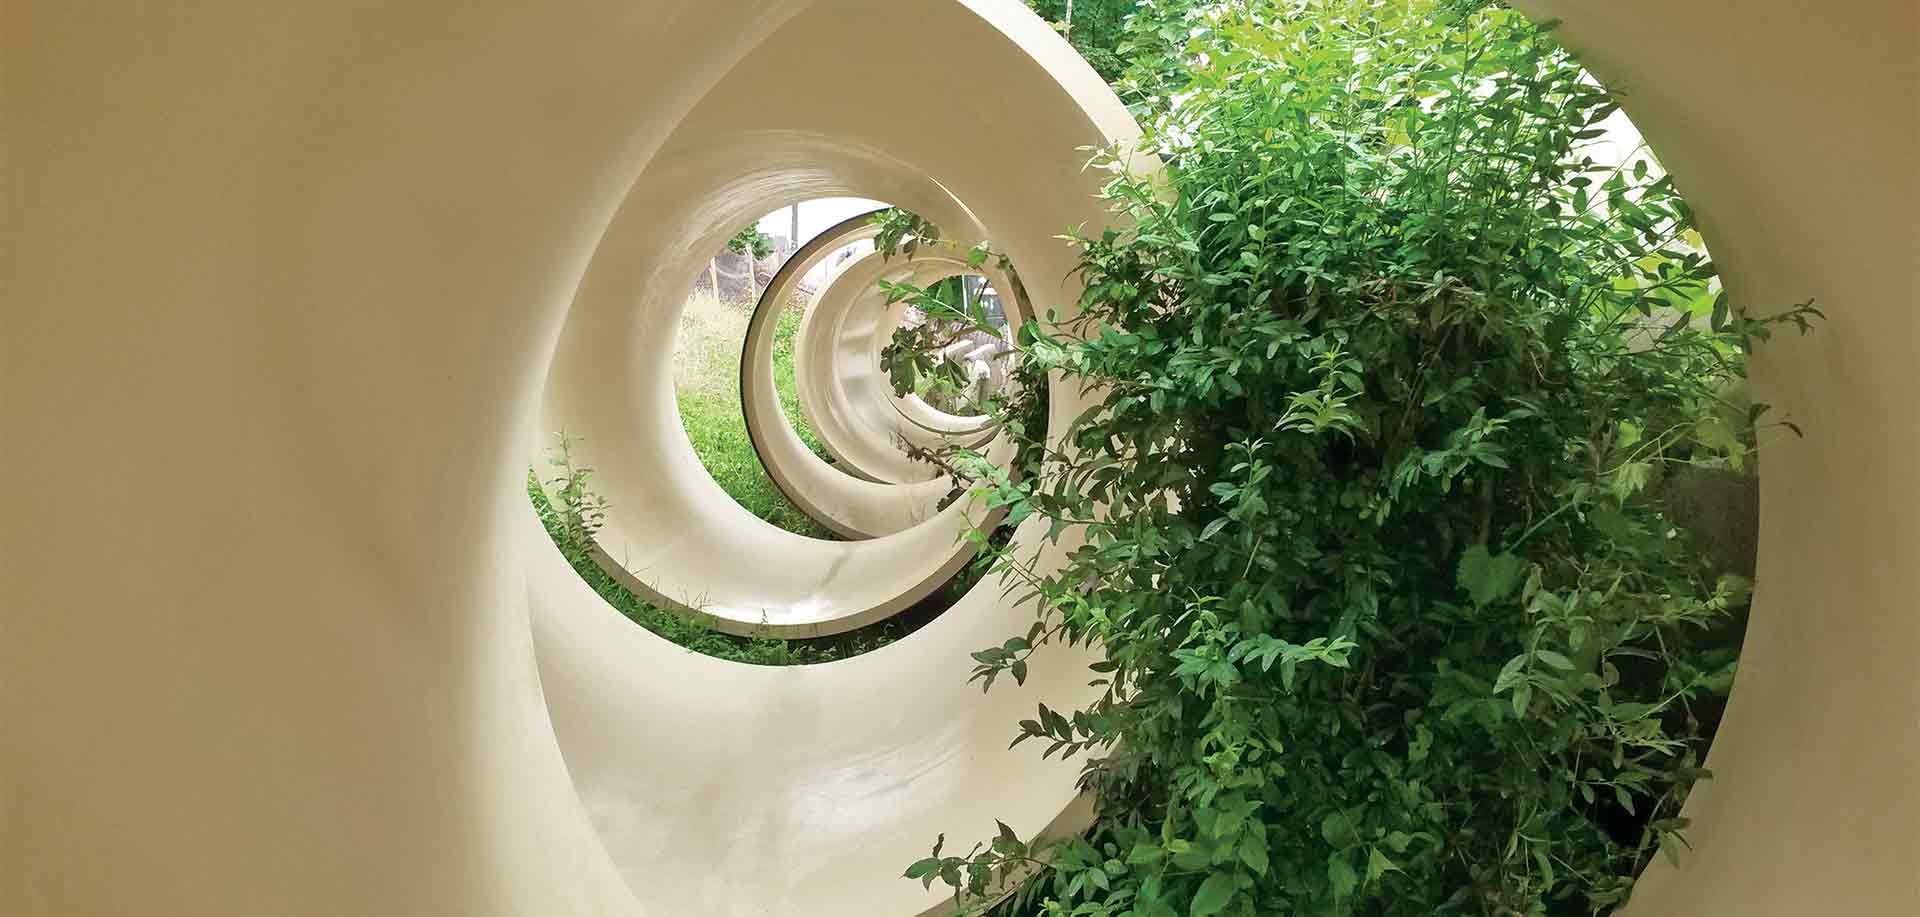 Amiblu GRP pipes in the heart of nature